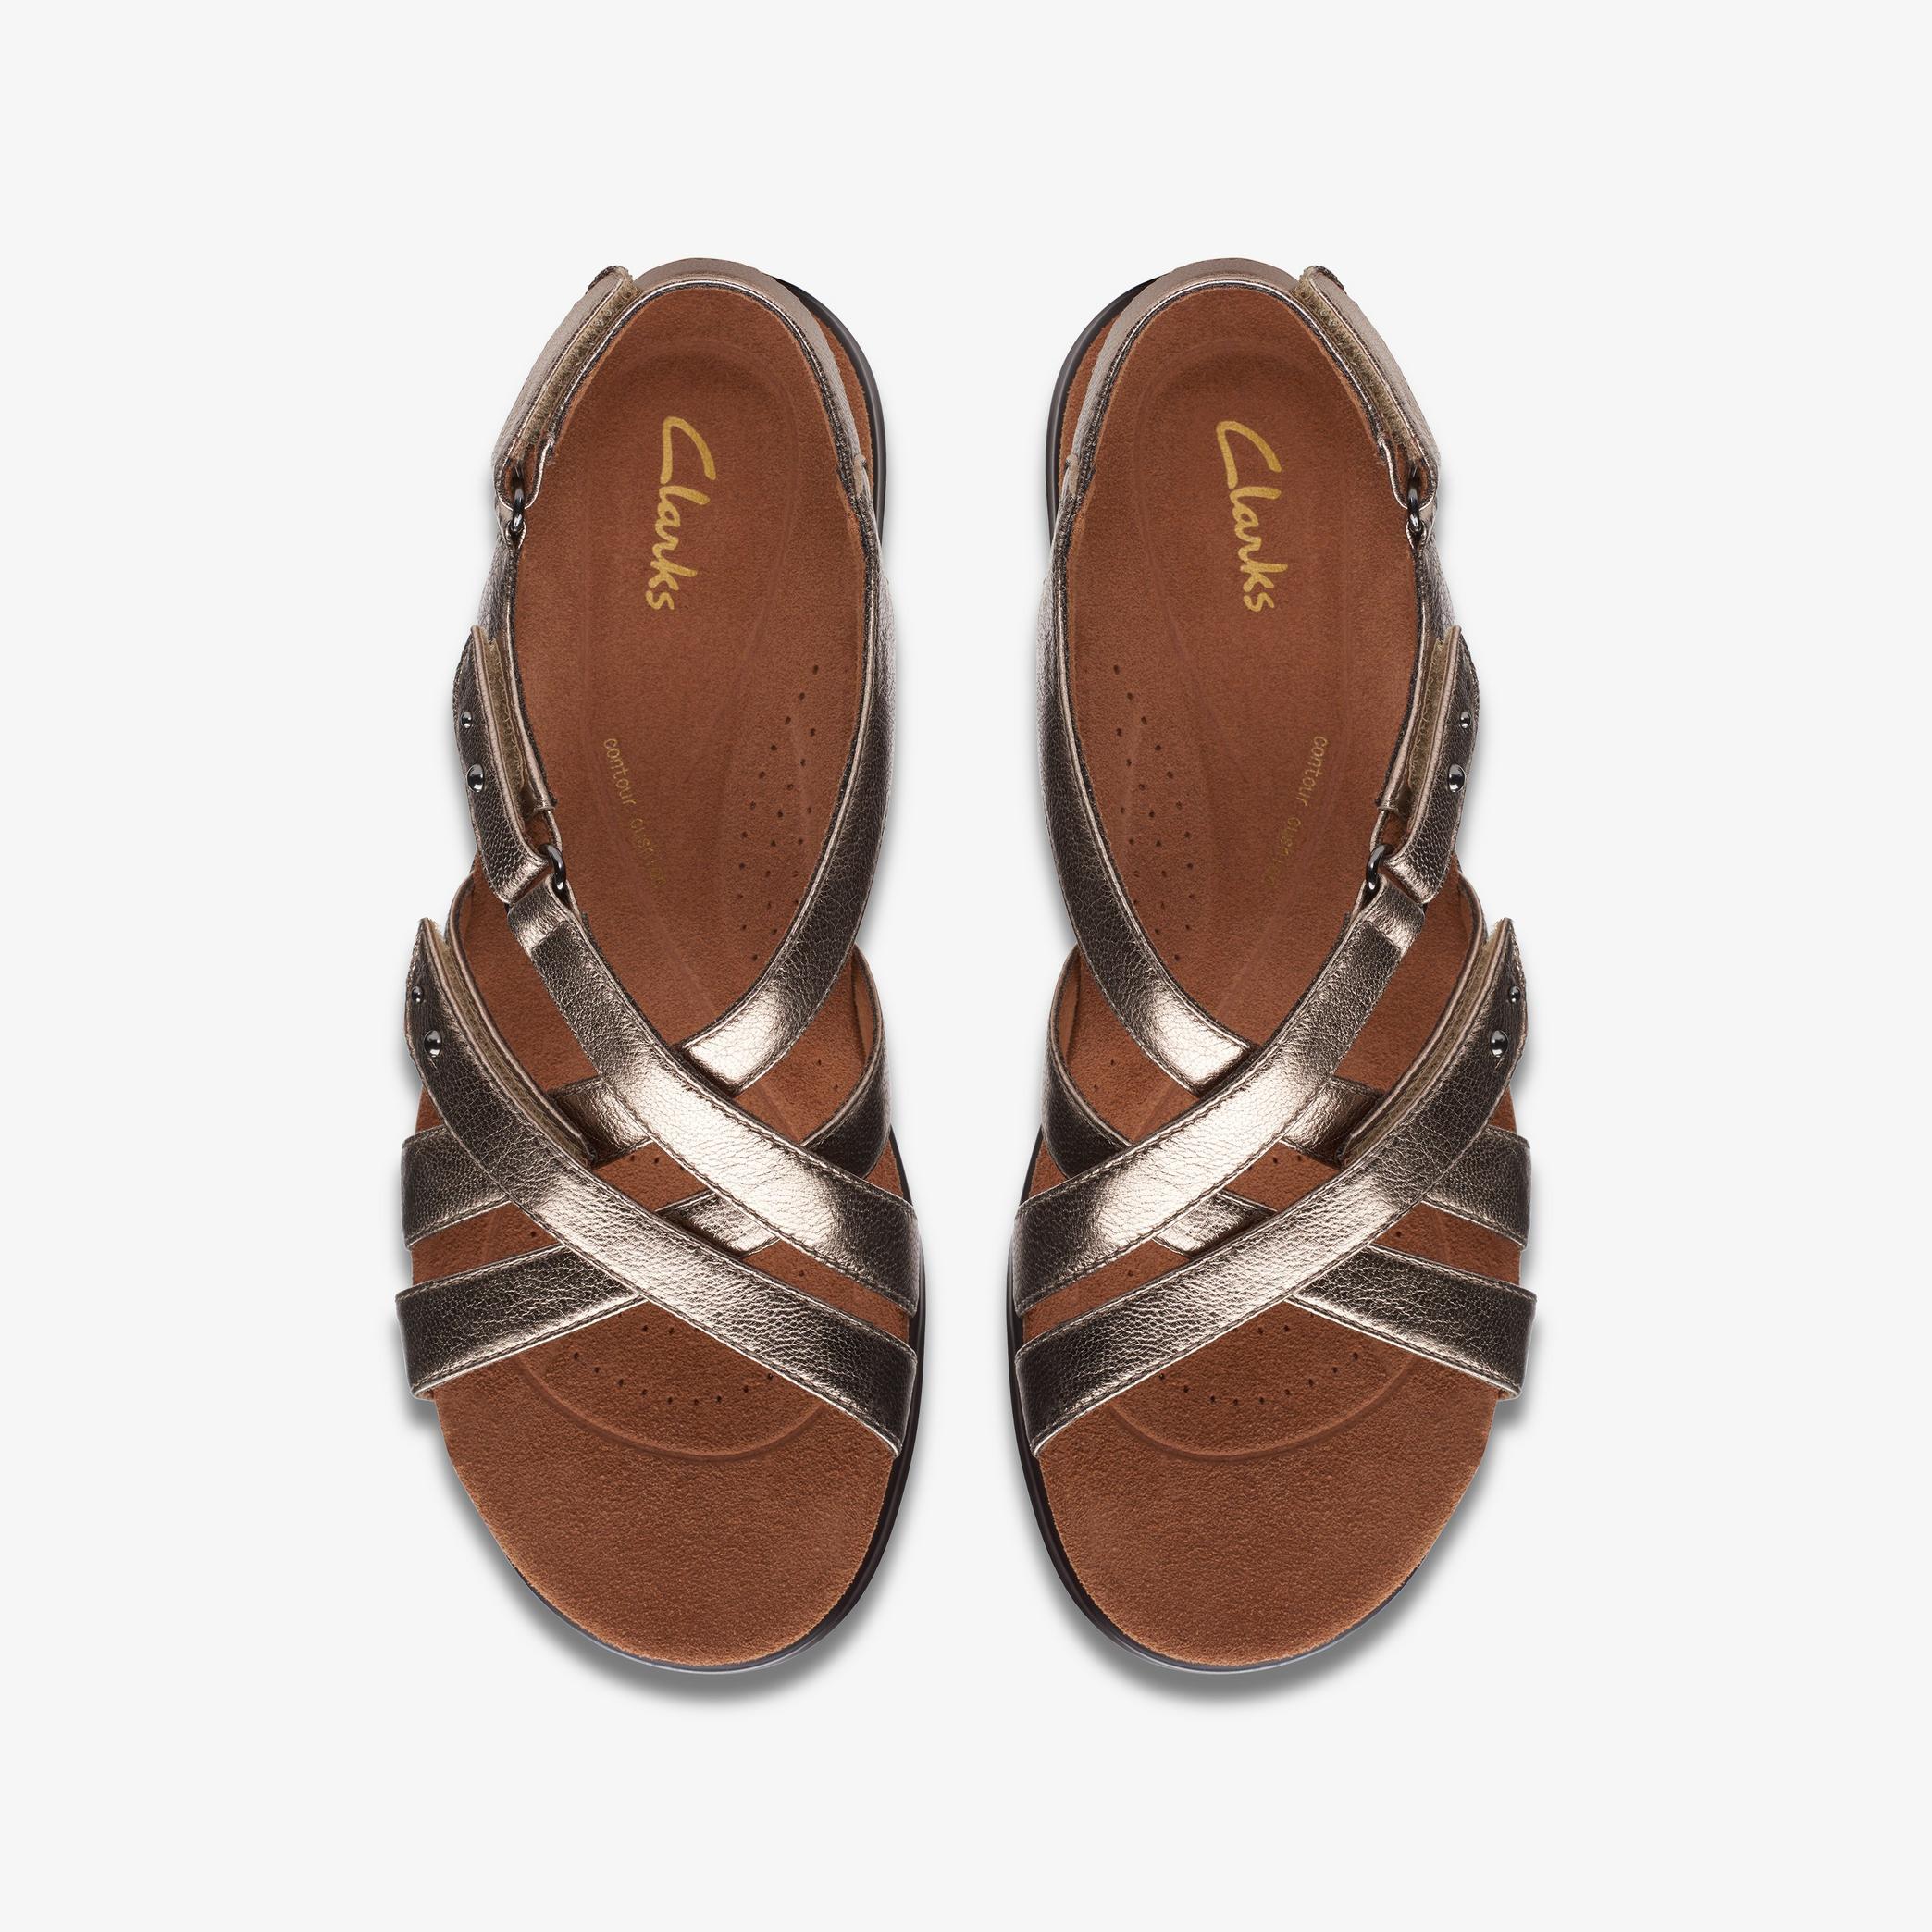 Kitly Go Metallic Flat Sandals, view 6 of 6